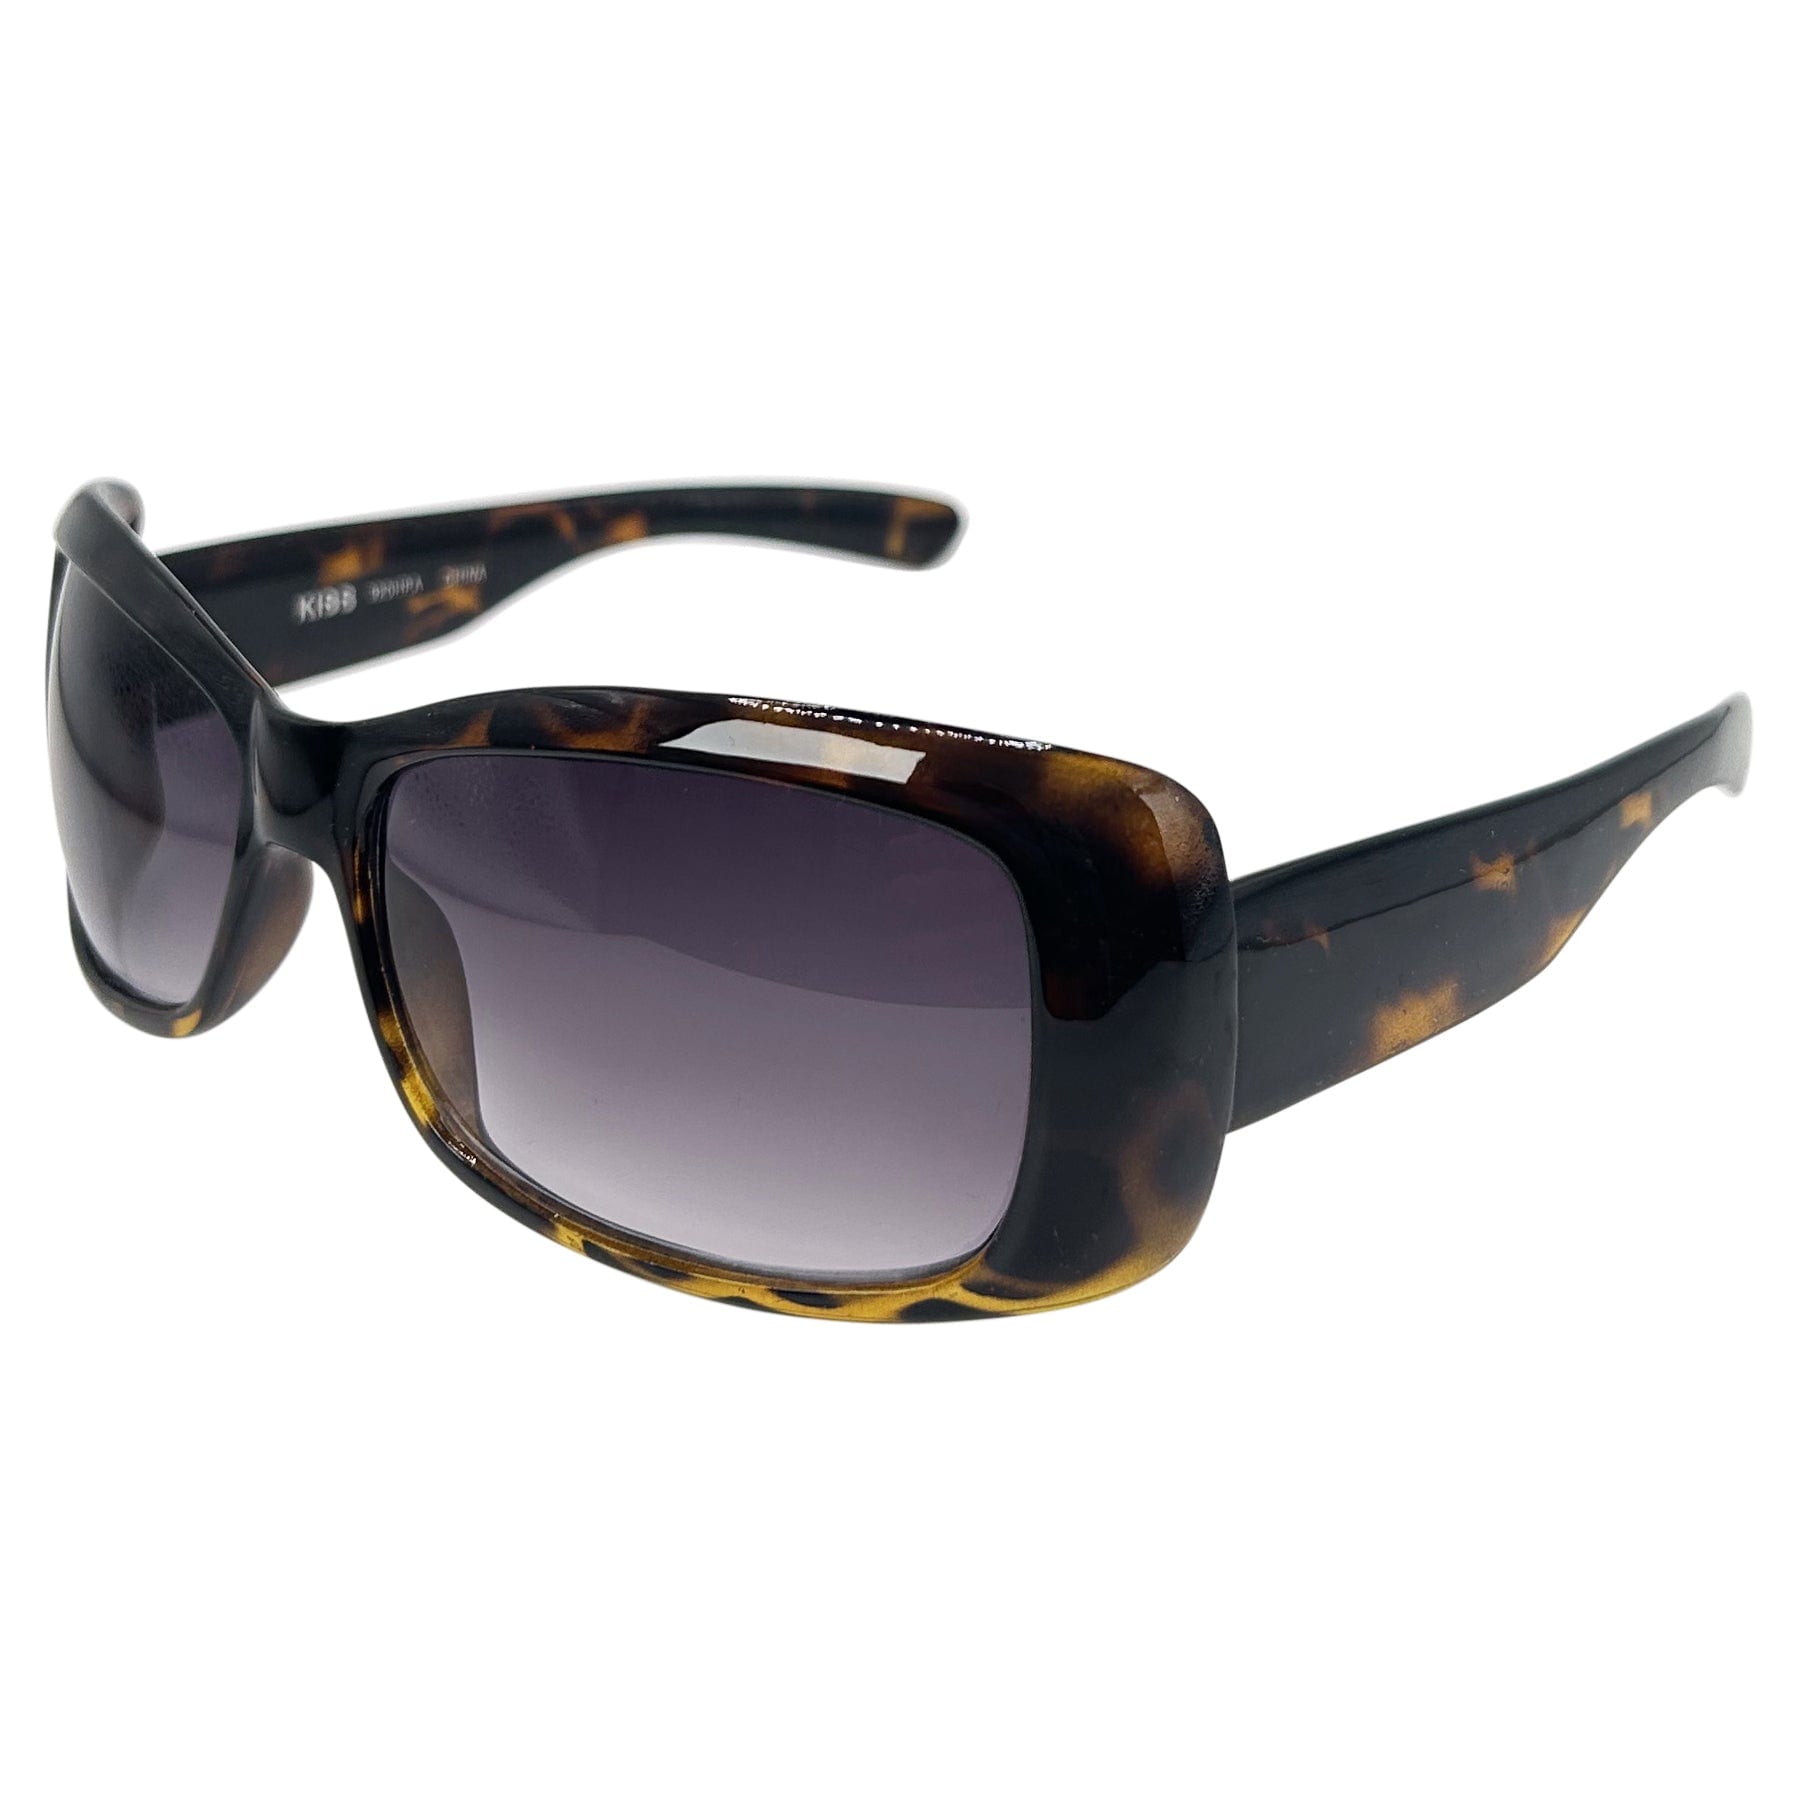 vintage tortoise shell sunglasses with a square shape and 90s style frame